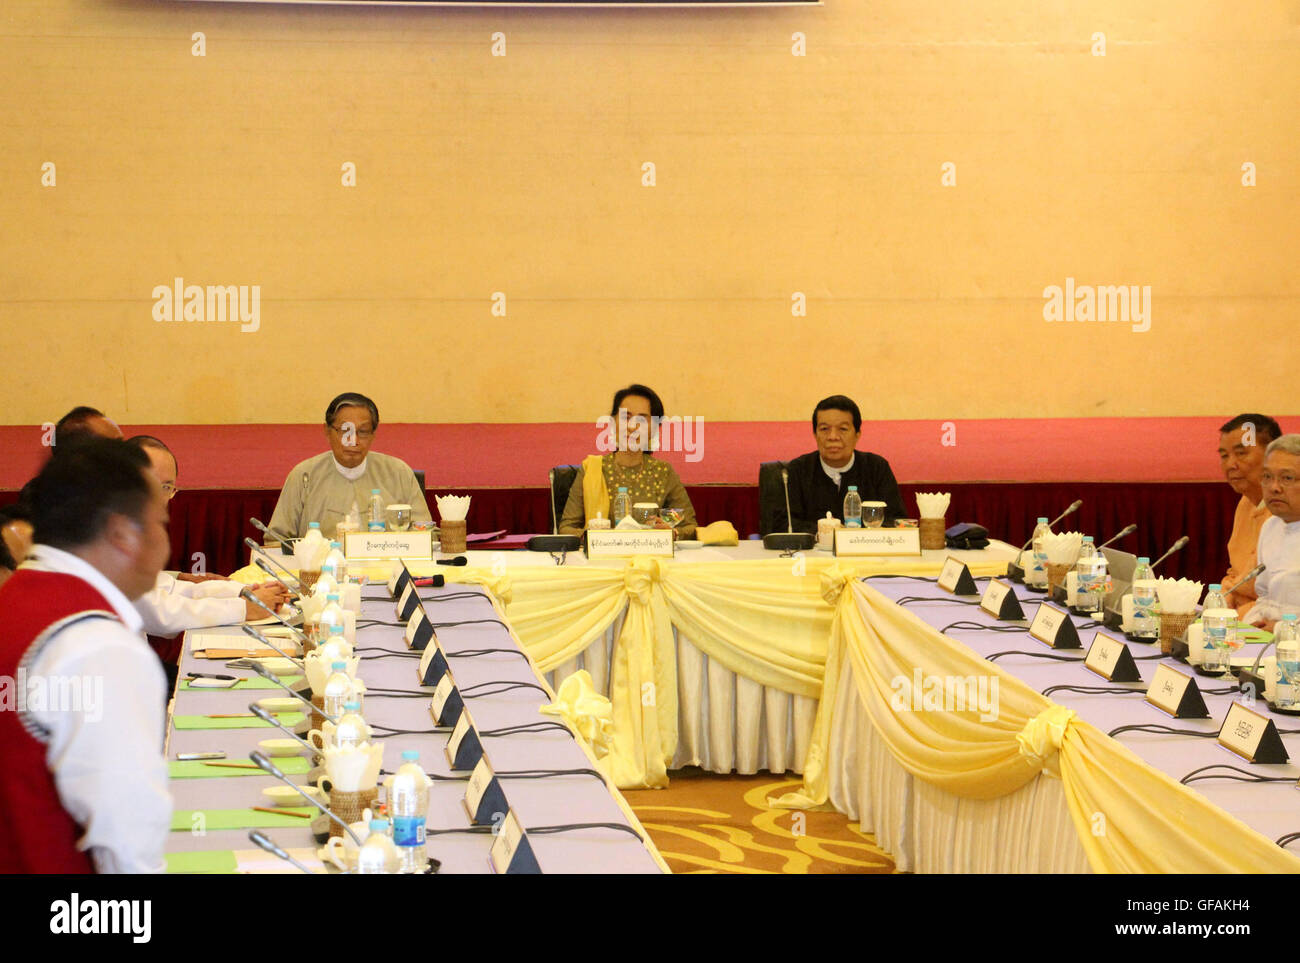 Nay Pyi Taw, Myanmar. 29th July, 2016. Myanmar State Counselor Aung San Suu Kyi (C, rear) meets with leaders of the United Wa State Army (UWSA) and the National Democratic Alliance Army-Eastern Shan State (NDAA-ESS)(Mongla) in Nay Pyi Taw, Myanmar, July 29, 2016. The Wa and Mongla delegations said on Friday that they welcome the 21st Century Panglong Ethnic Conference although the detailed discussions of participation are underway, said U Zaw Htay, spokesperson for the President's Office. © Soe Than Lynn/Xinhua/Alamy Live News Stock Photo